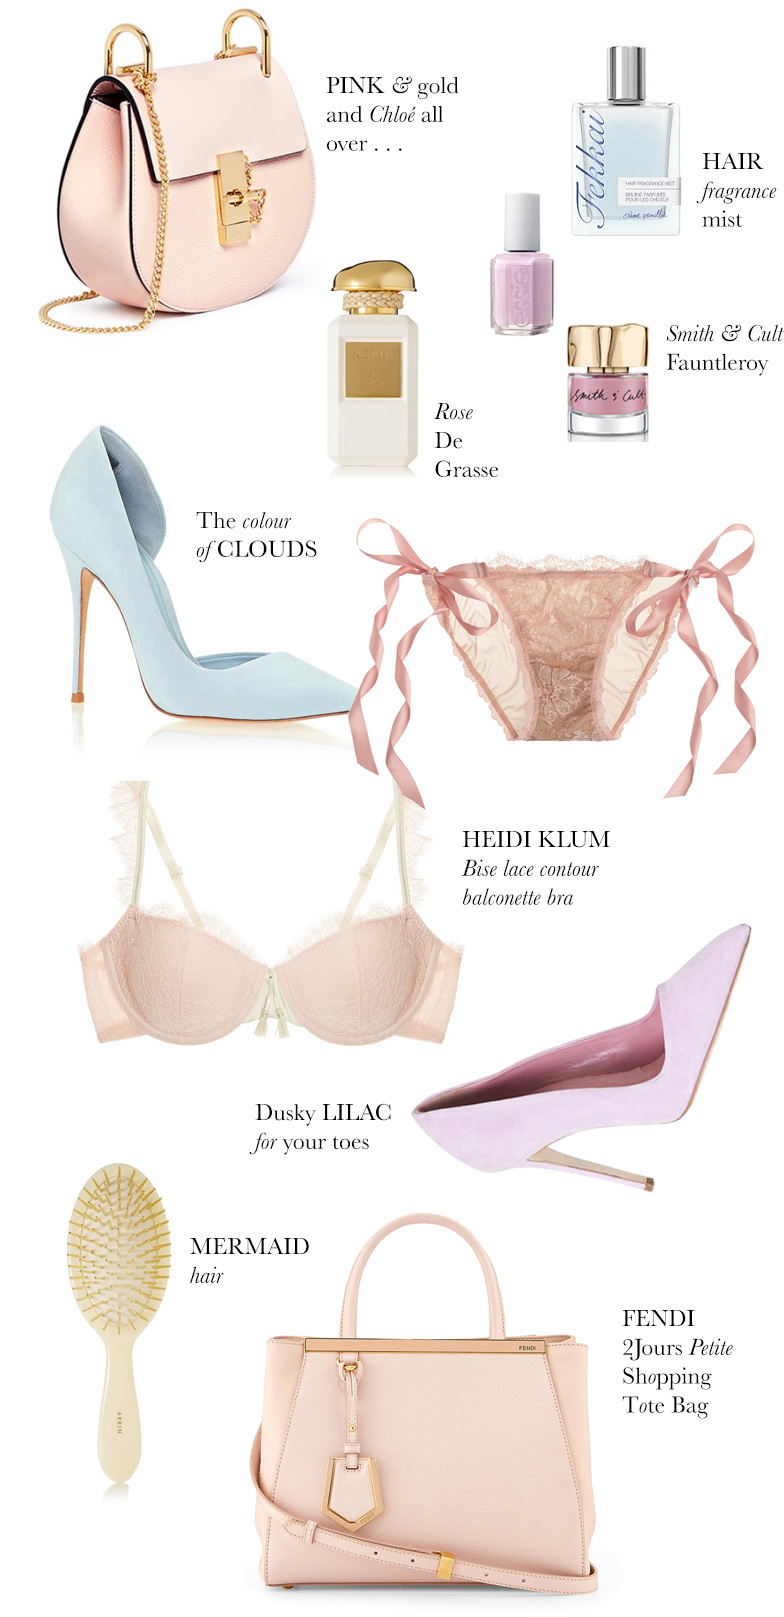 At the Shops : Spring Things in Shades of Perfectly Pretty Pastel